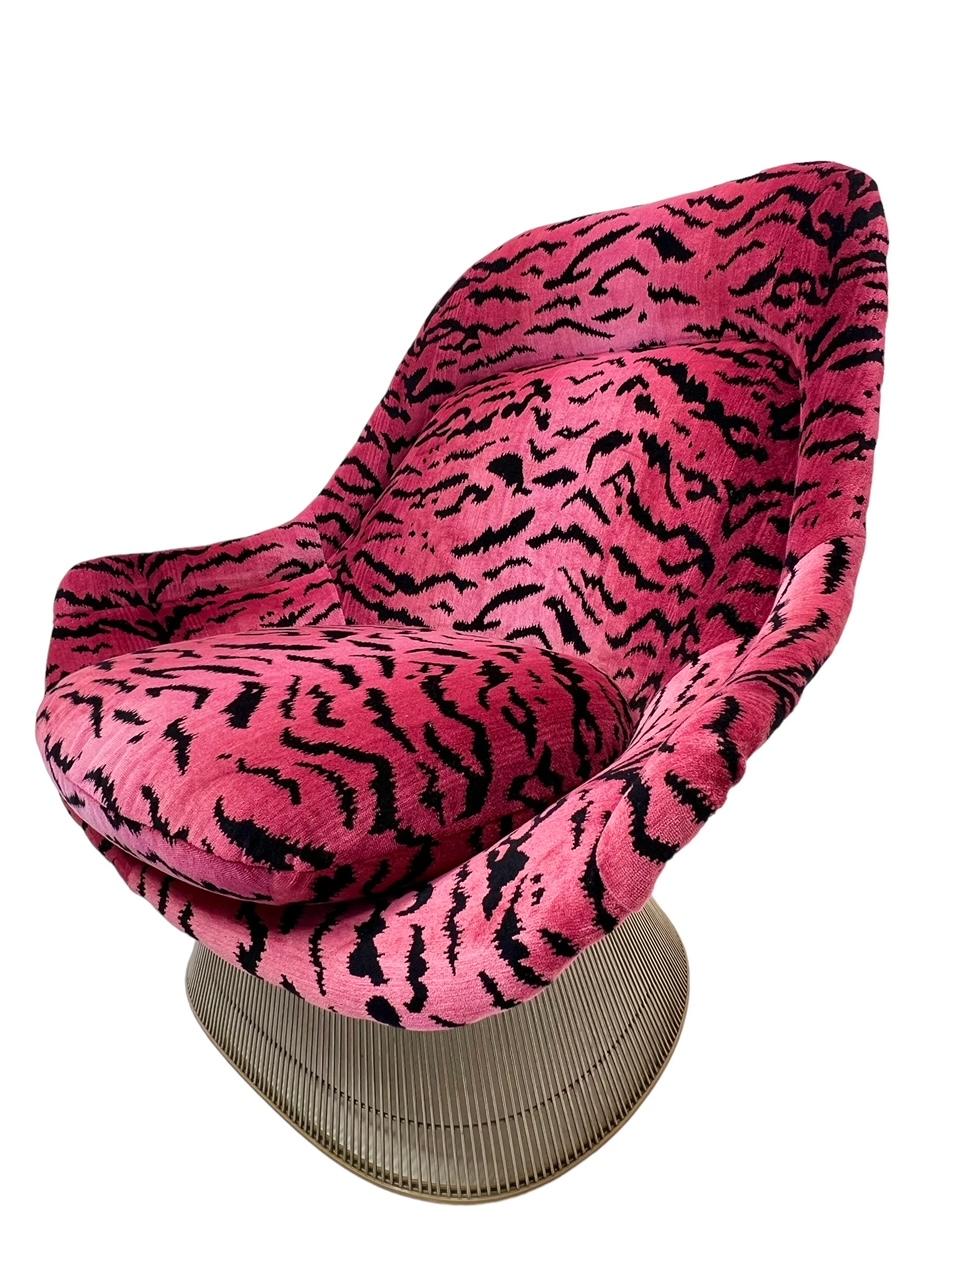 Warren Platner Easy Chair and Ottoman in Scalamandre Pink Tigre Fabric For Sale 1